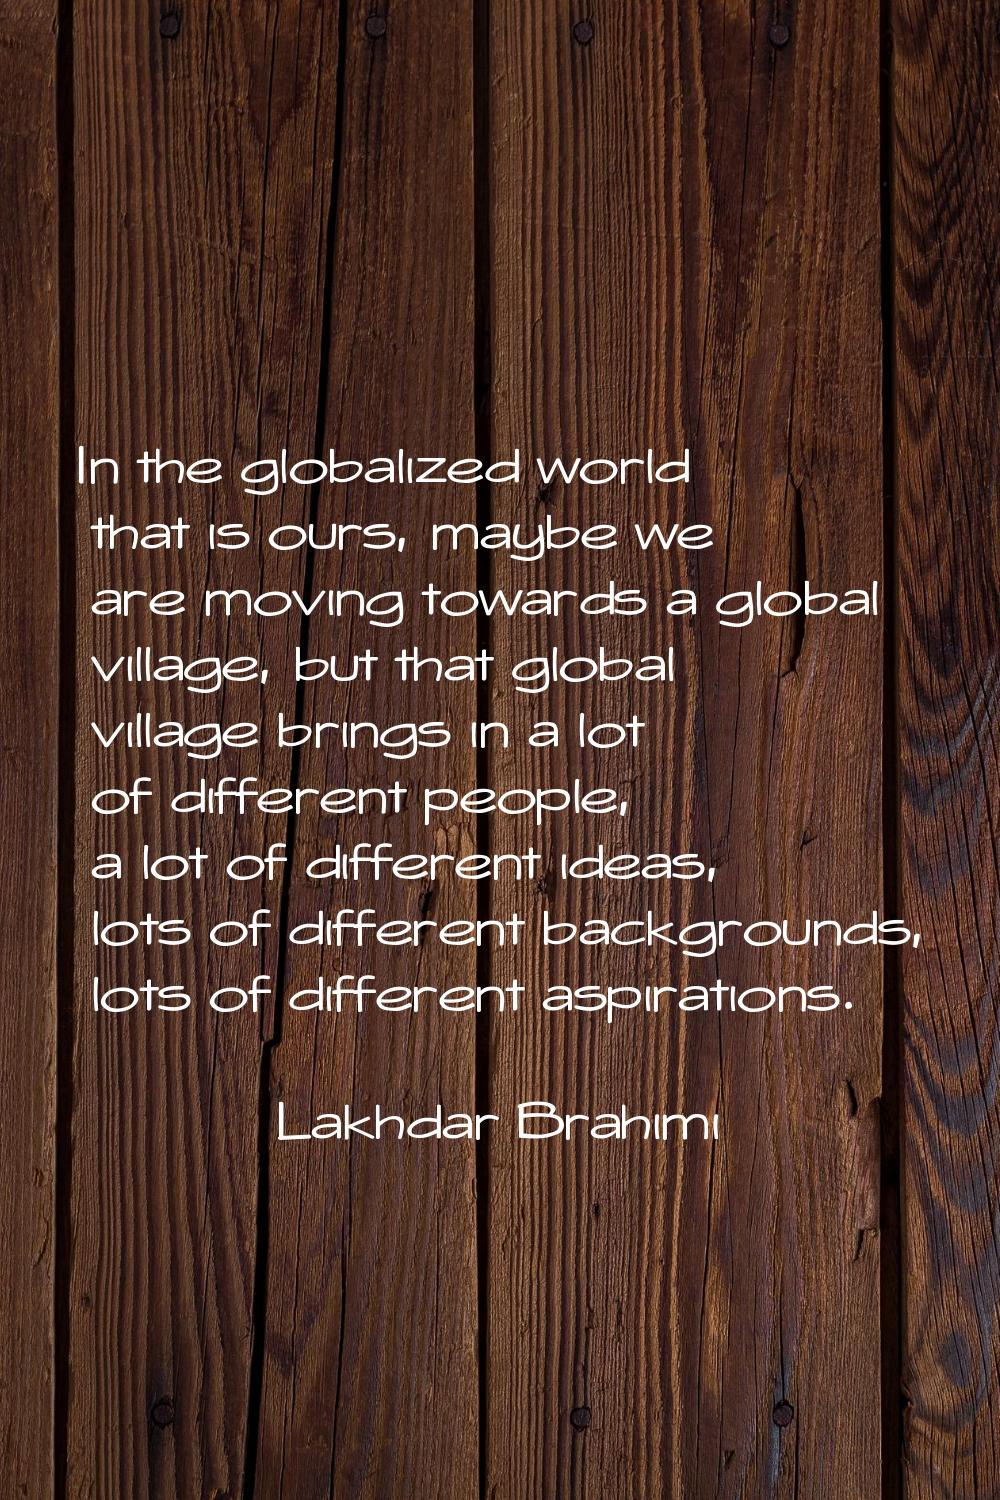 In the globalized world that is ours, maybe we are moving towards a global village, but that global